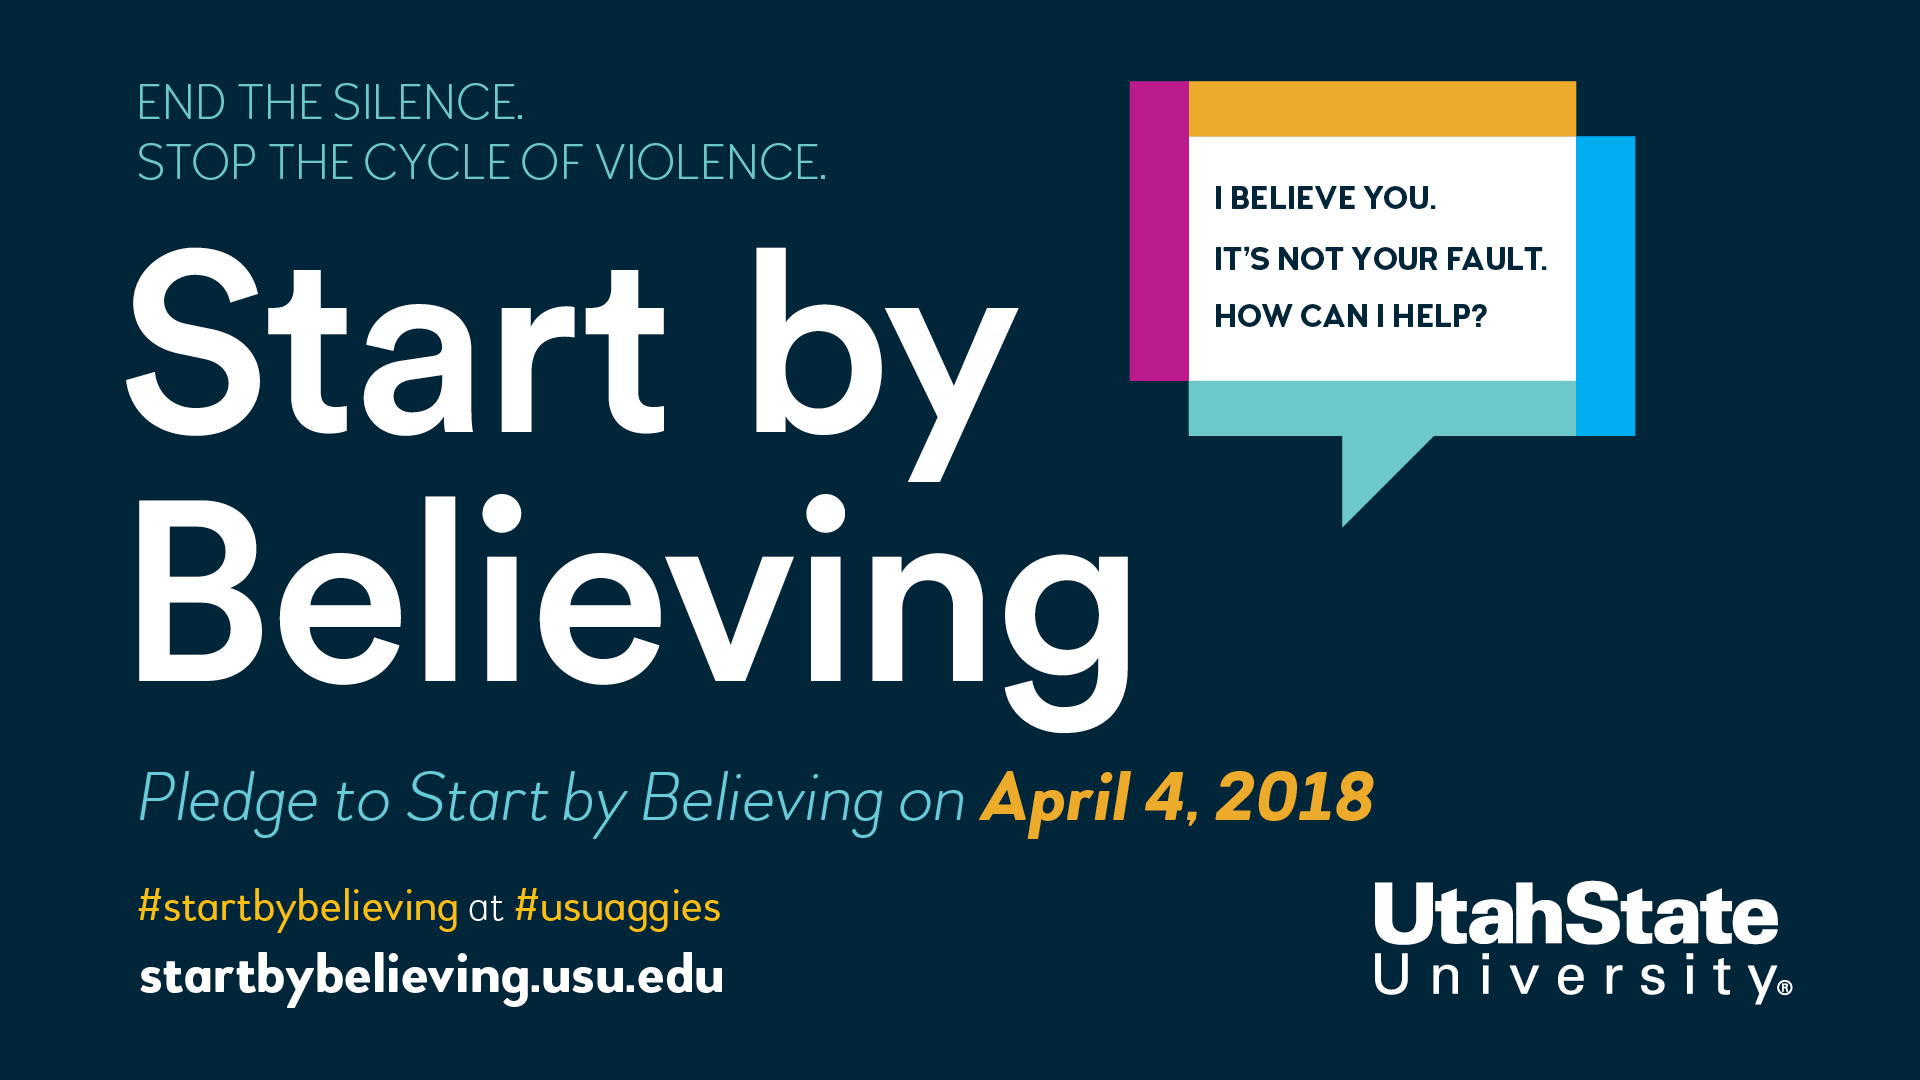 End the silence. Stop the cycle of violence. Start by believing. Pledge to start by believing on April 4, 2018 #startbybelieving at #usuaggies startbybelieving.usu.edu. Utah State University